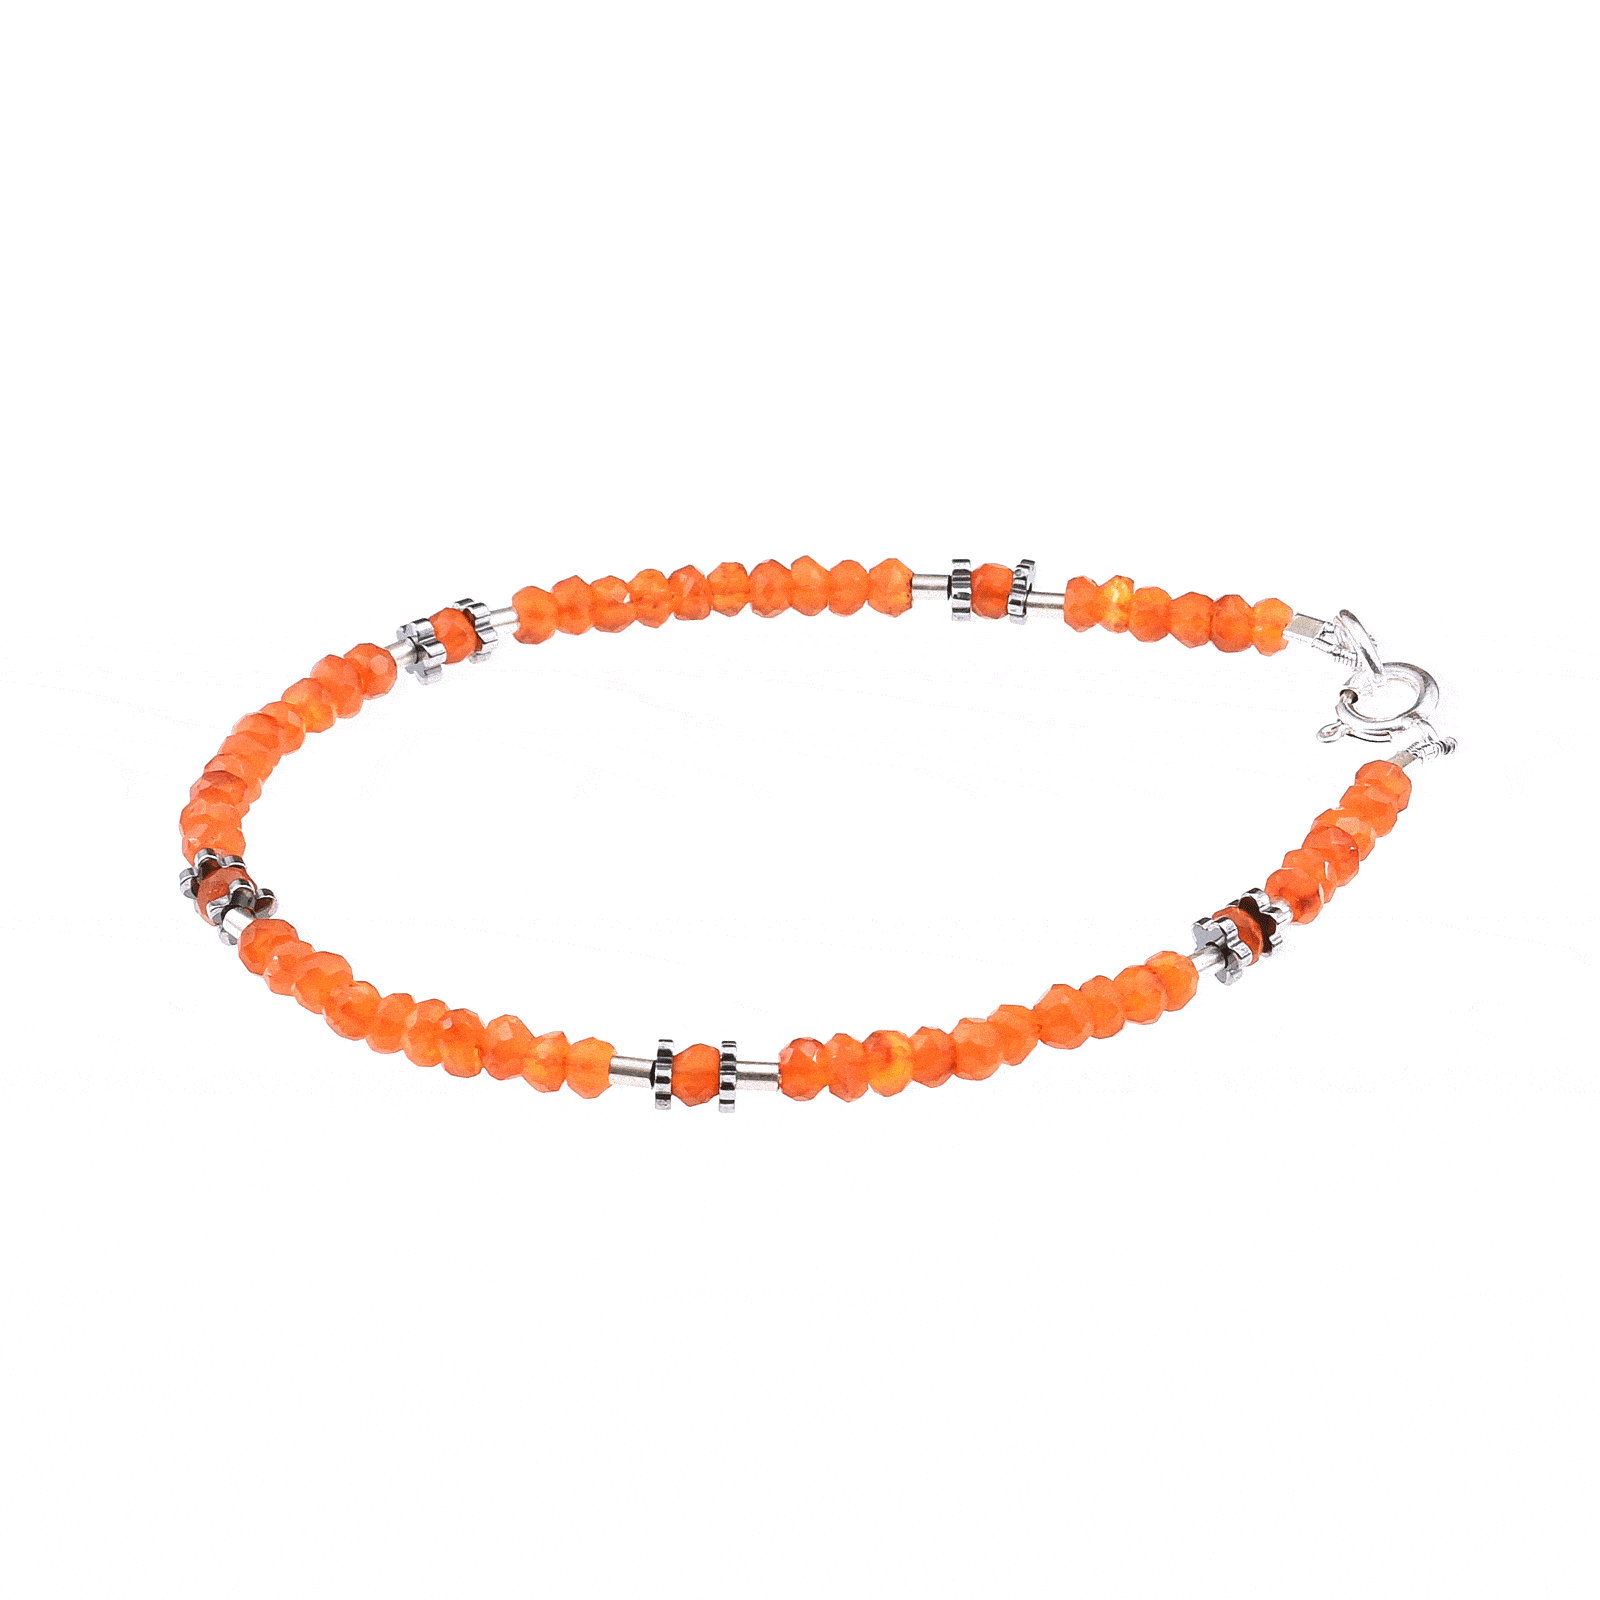 Handmade bracelet with natural Carnelian and Hematite gemstones and decorative elements made of sterling silver. Buy online shop.